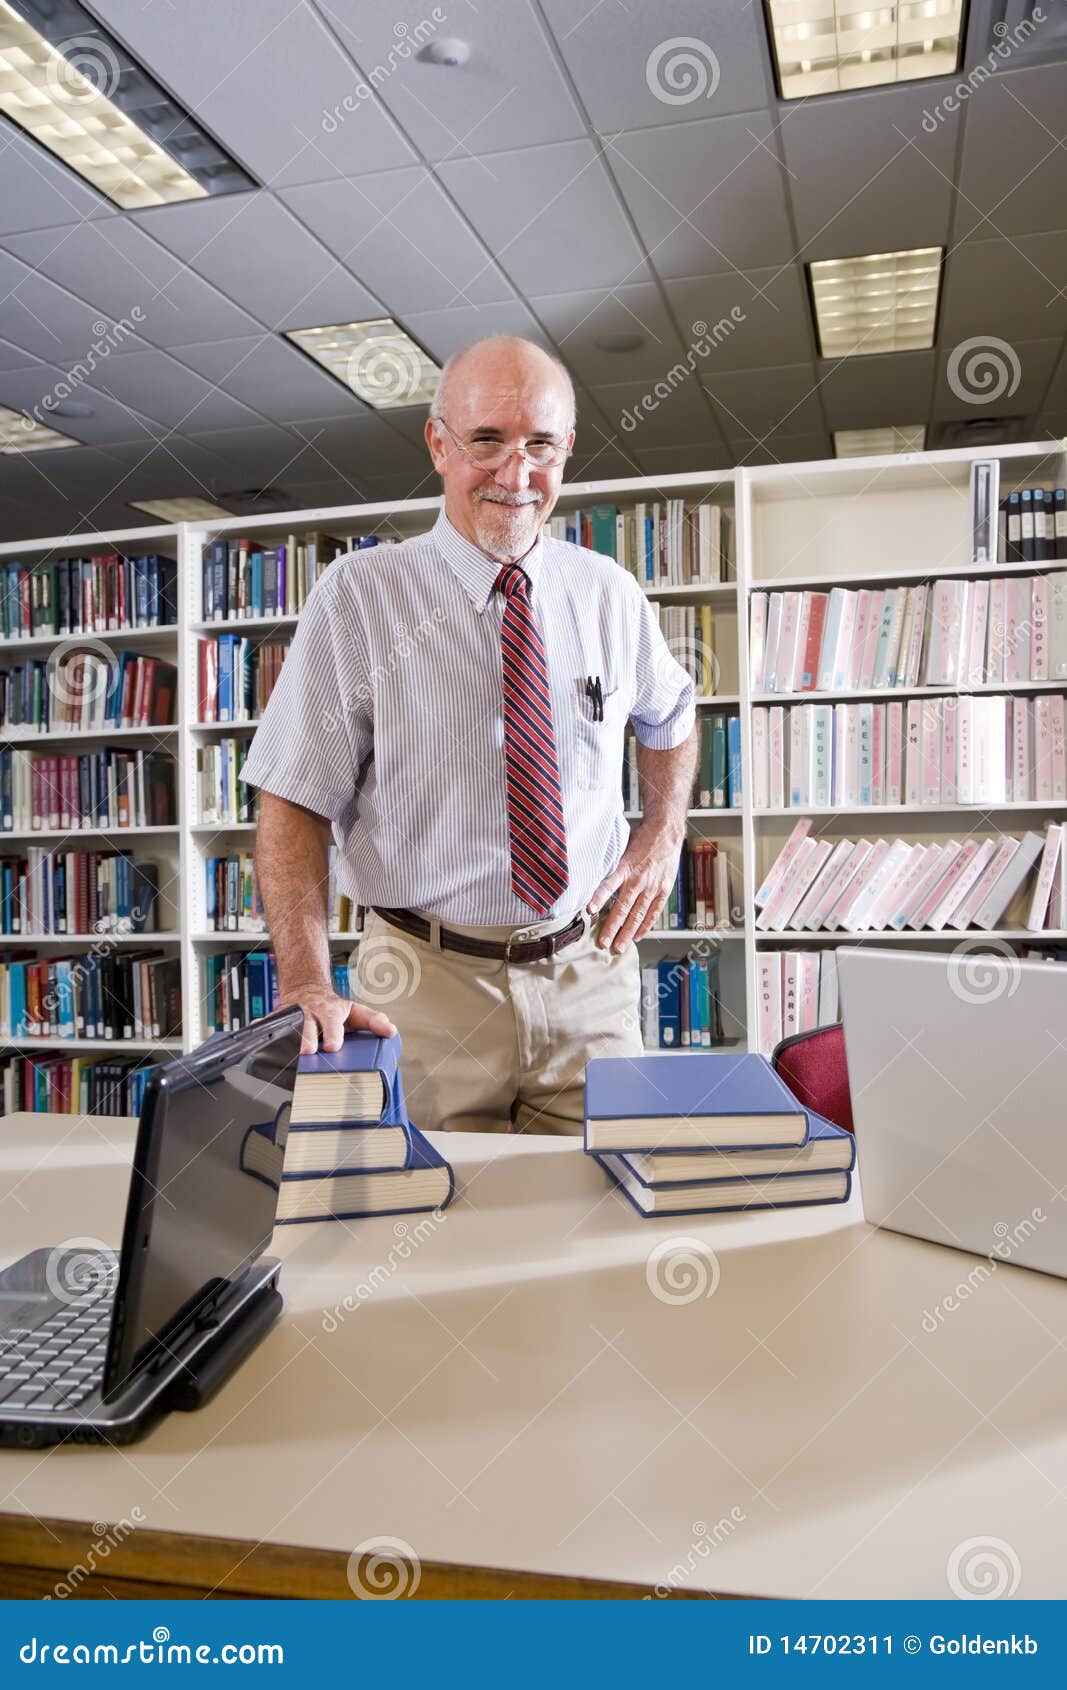 portrait of mature man at library with textbooks